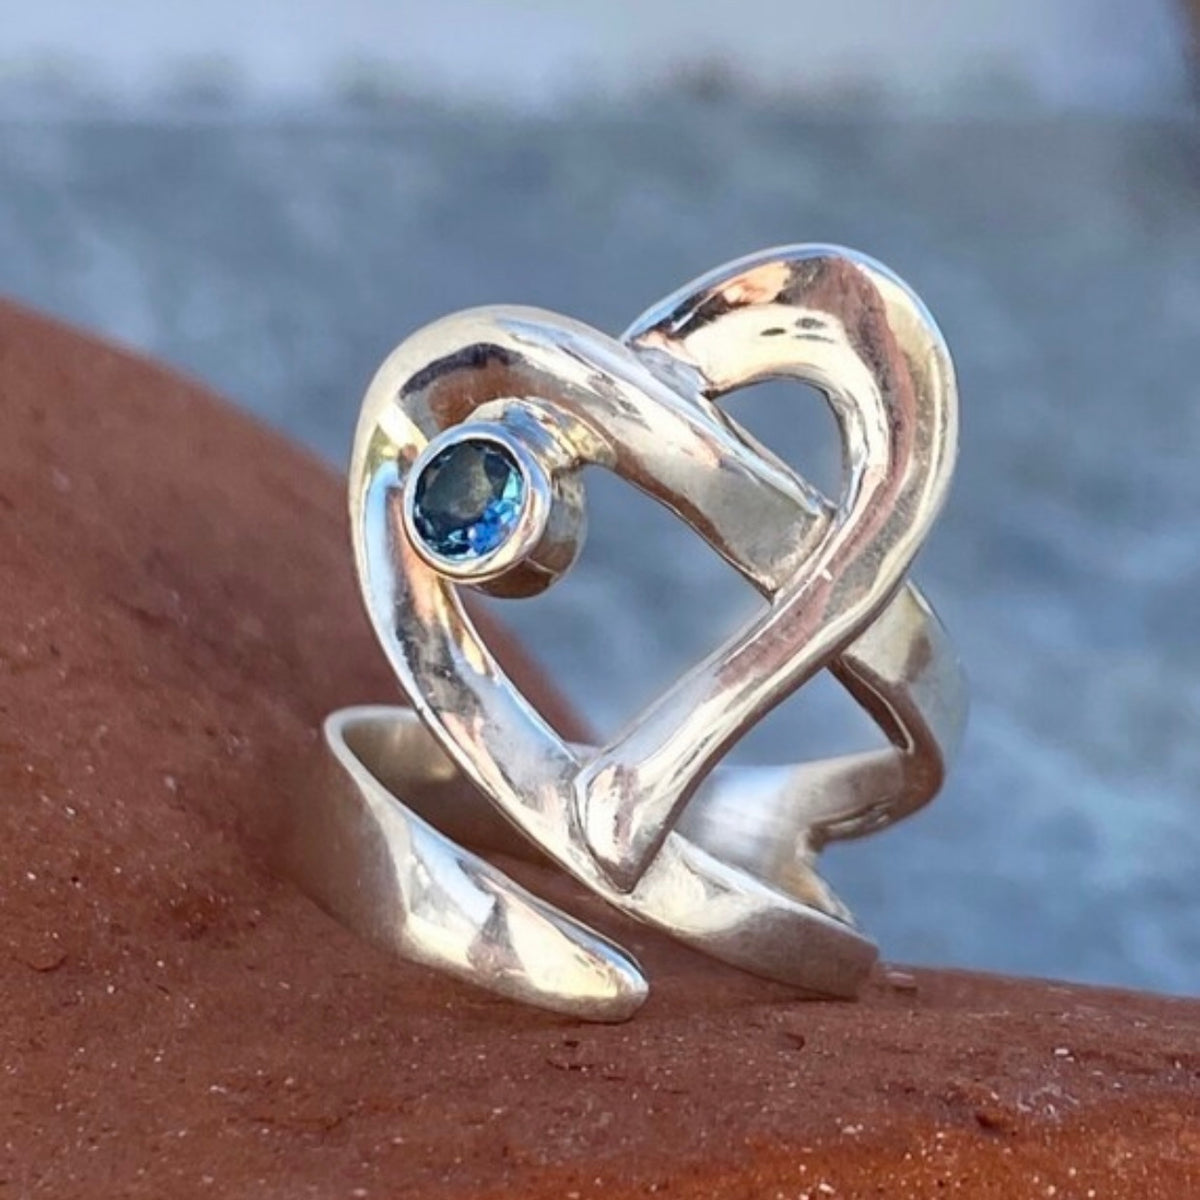 Heart ring silver adjustable with blue gemstone